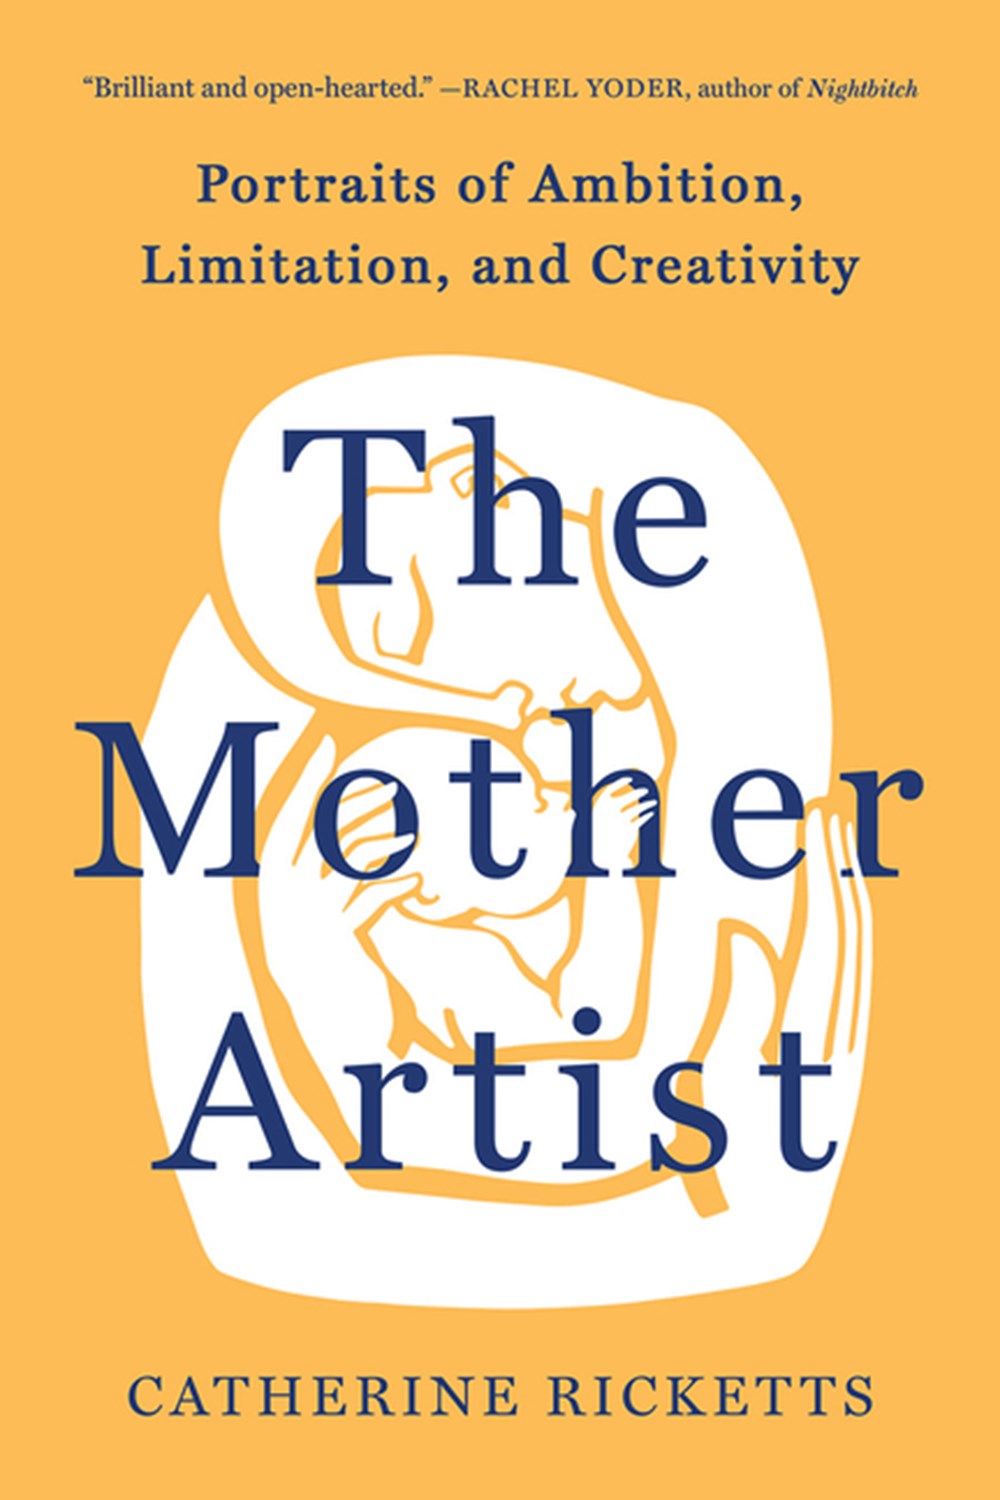 Mother Artist: Portraits of Ambition, Limitation, and Creativity